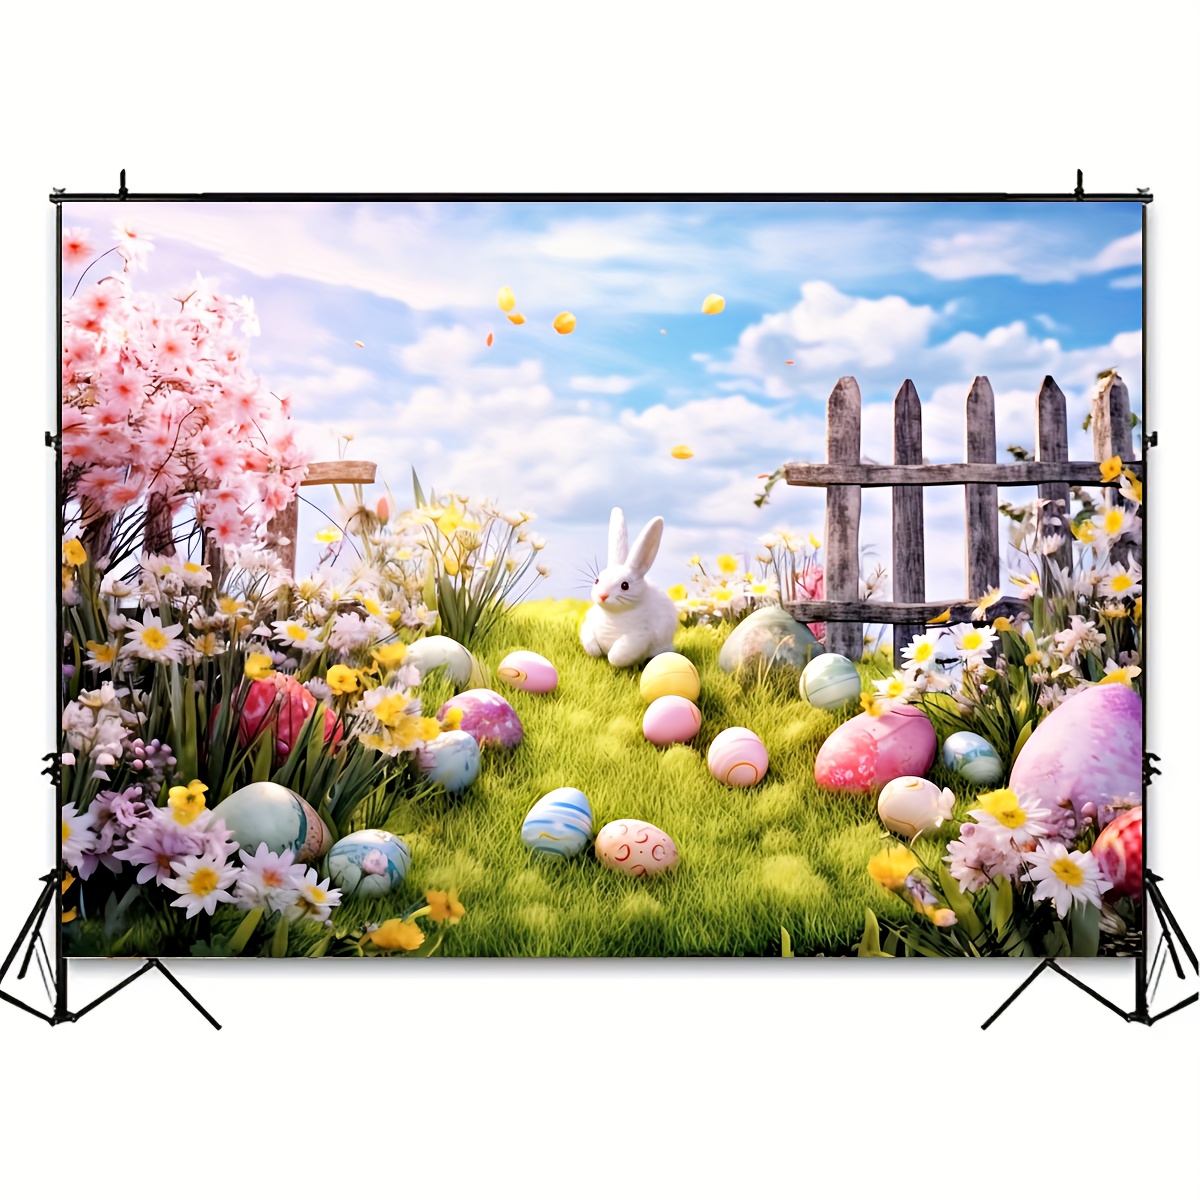 1pc spring easter polyester photography backdrop garden fence flower bunny colorful eggs party photo background tapestry green grass floral kids photo banner decorations kids photo booths studio props banner decorations